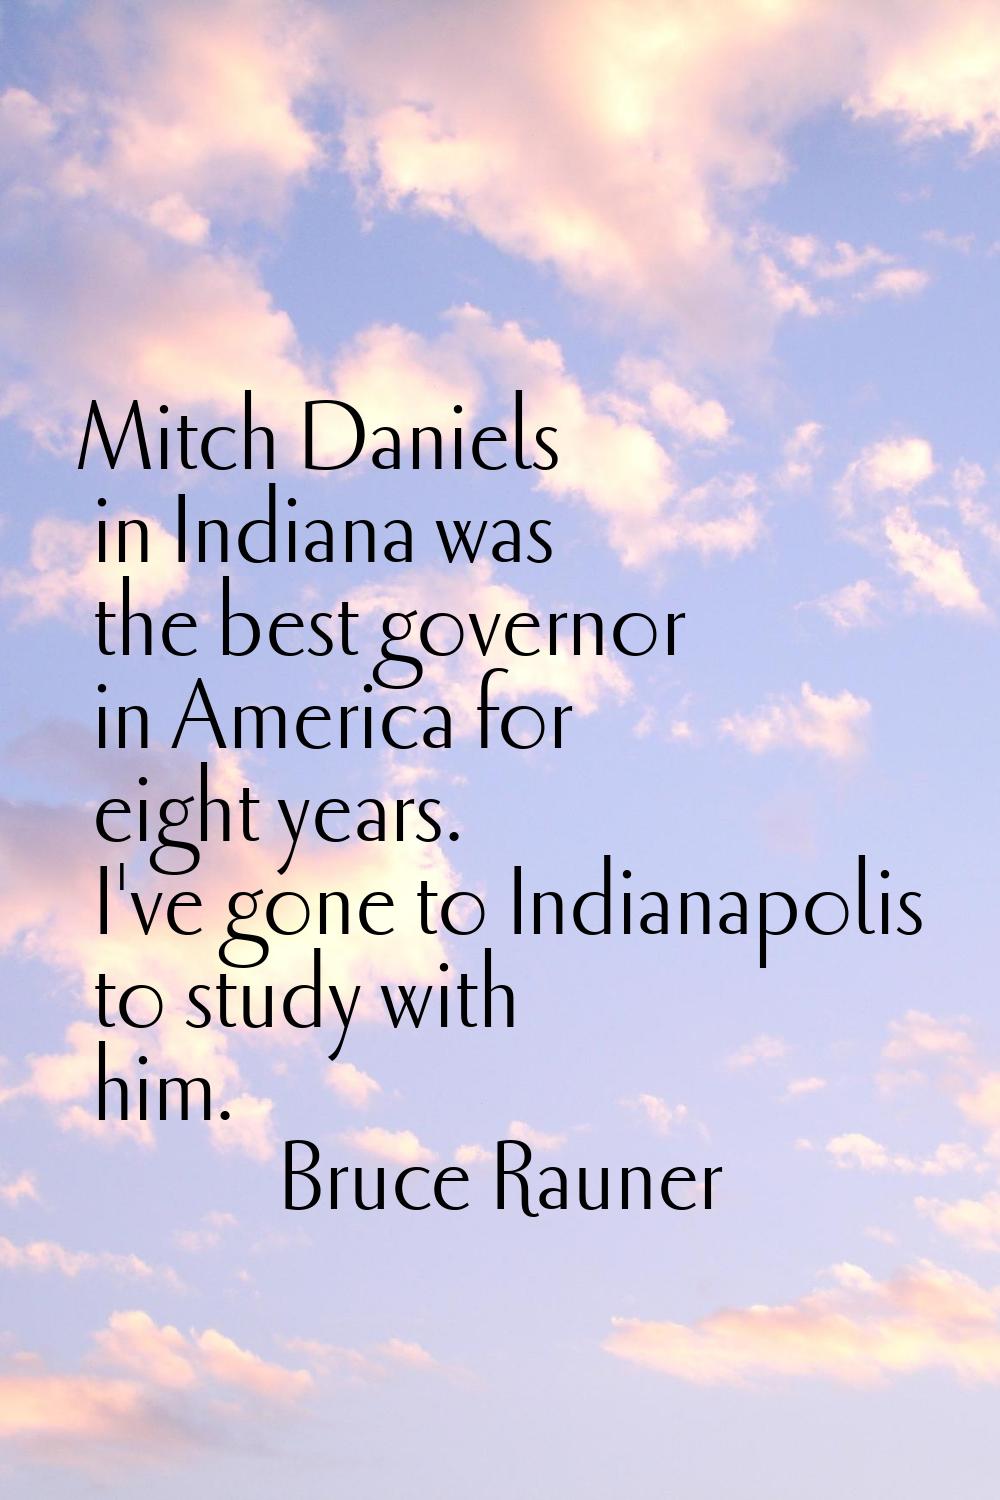 Mitch Daniels in Indiana was the best governor in America for eight years. I've gone to Indianapoli